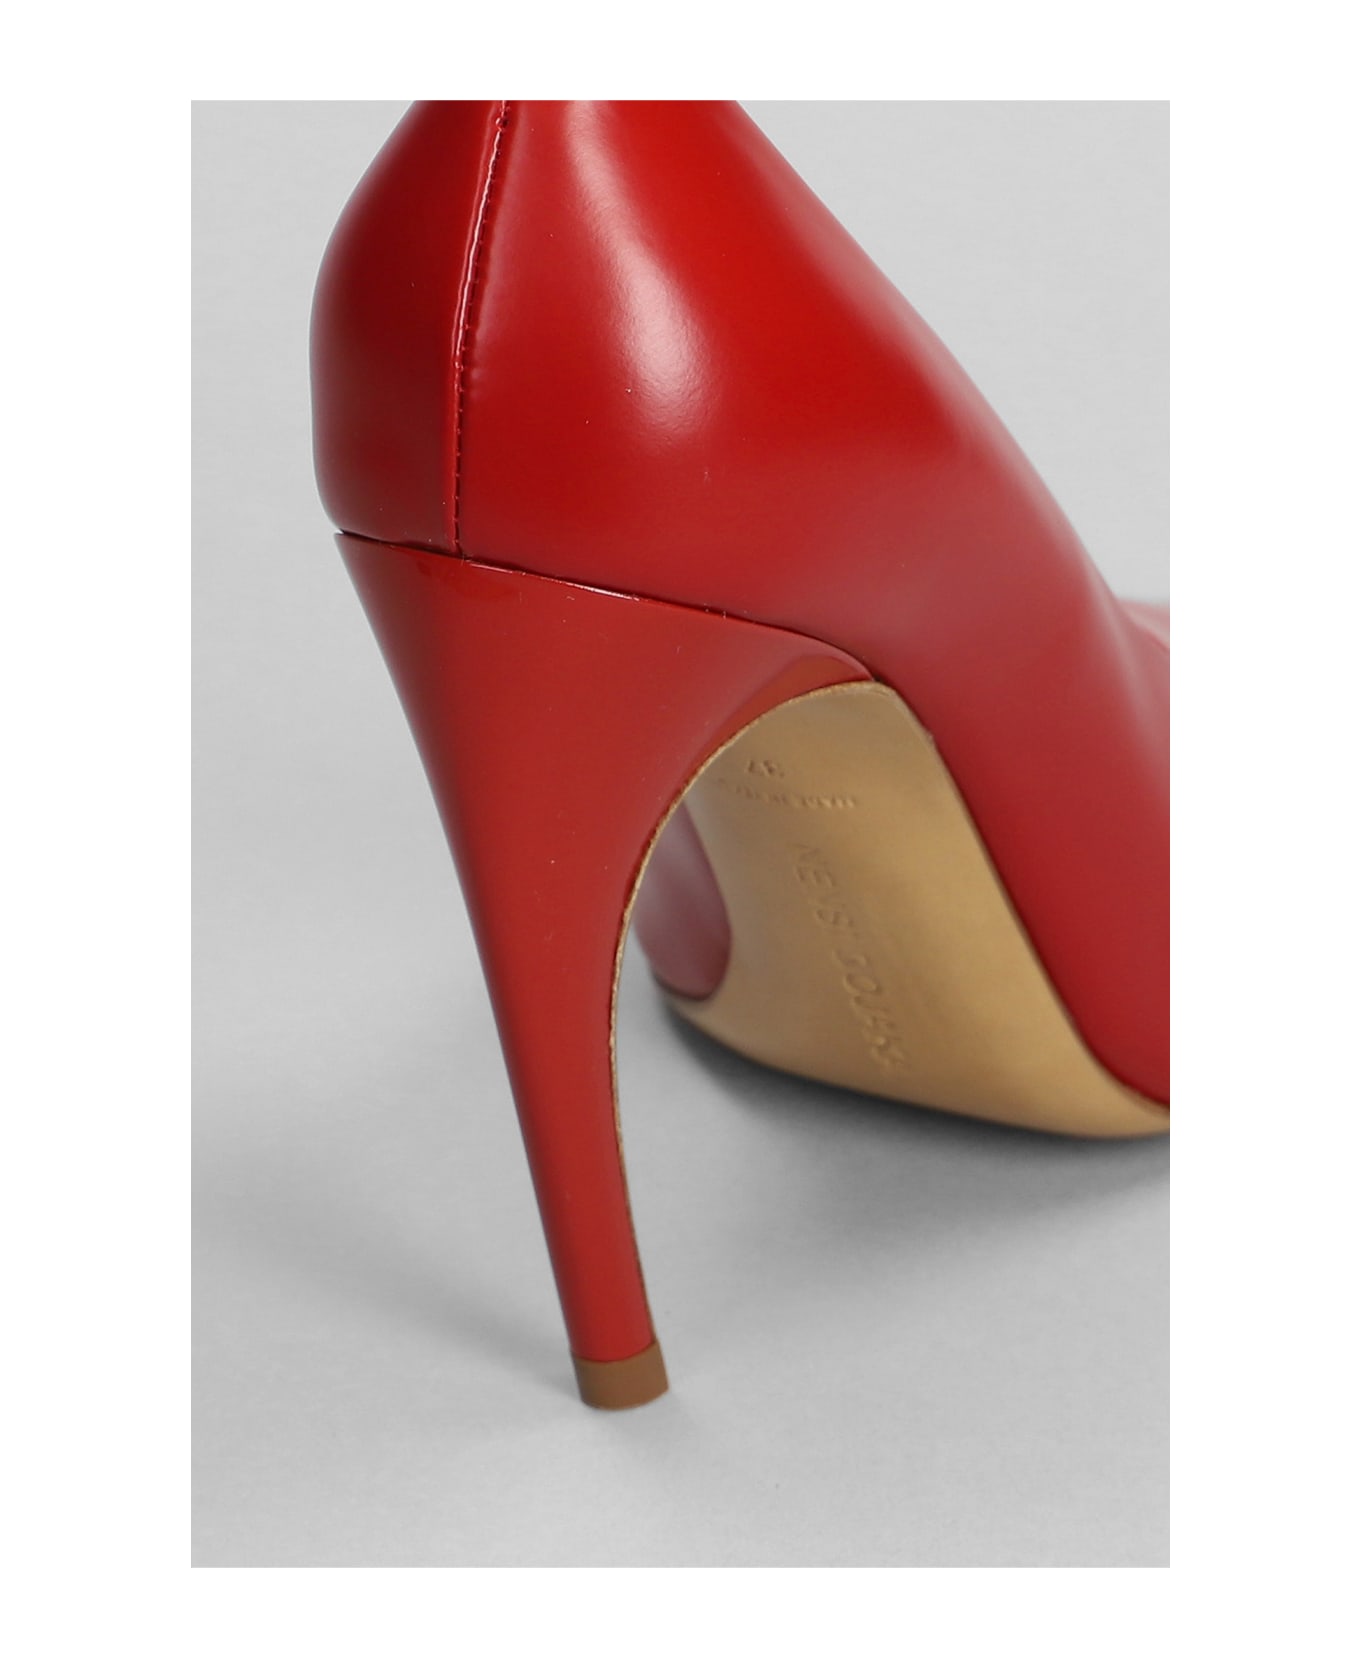 Nensi Dojaka Pumps In Red Leather - red